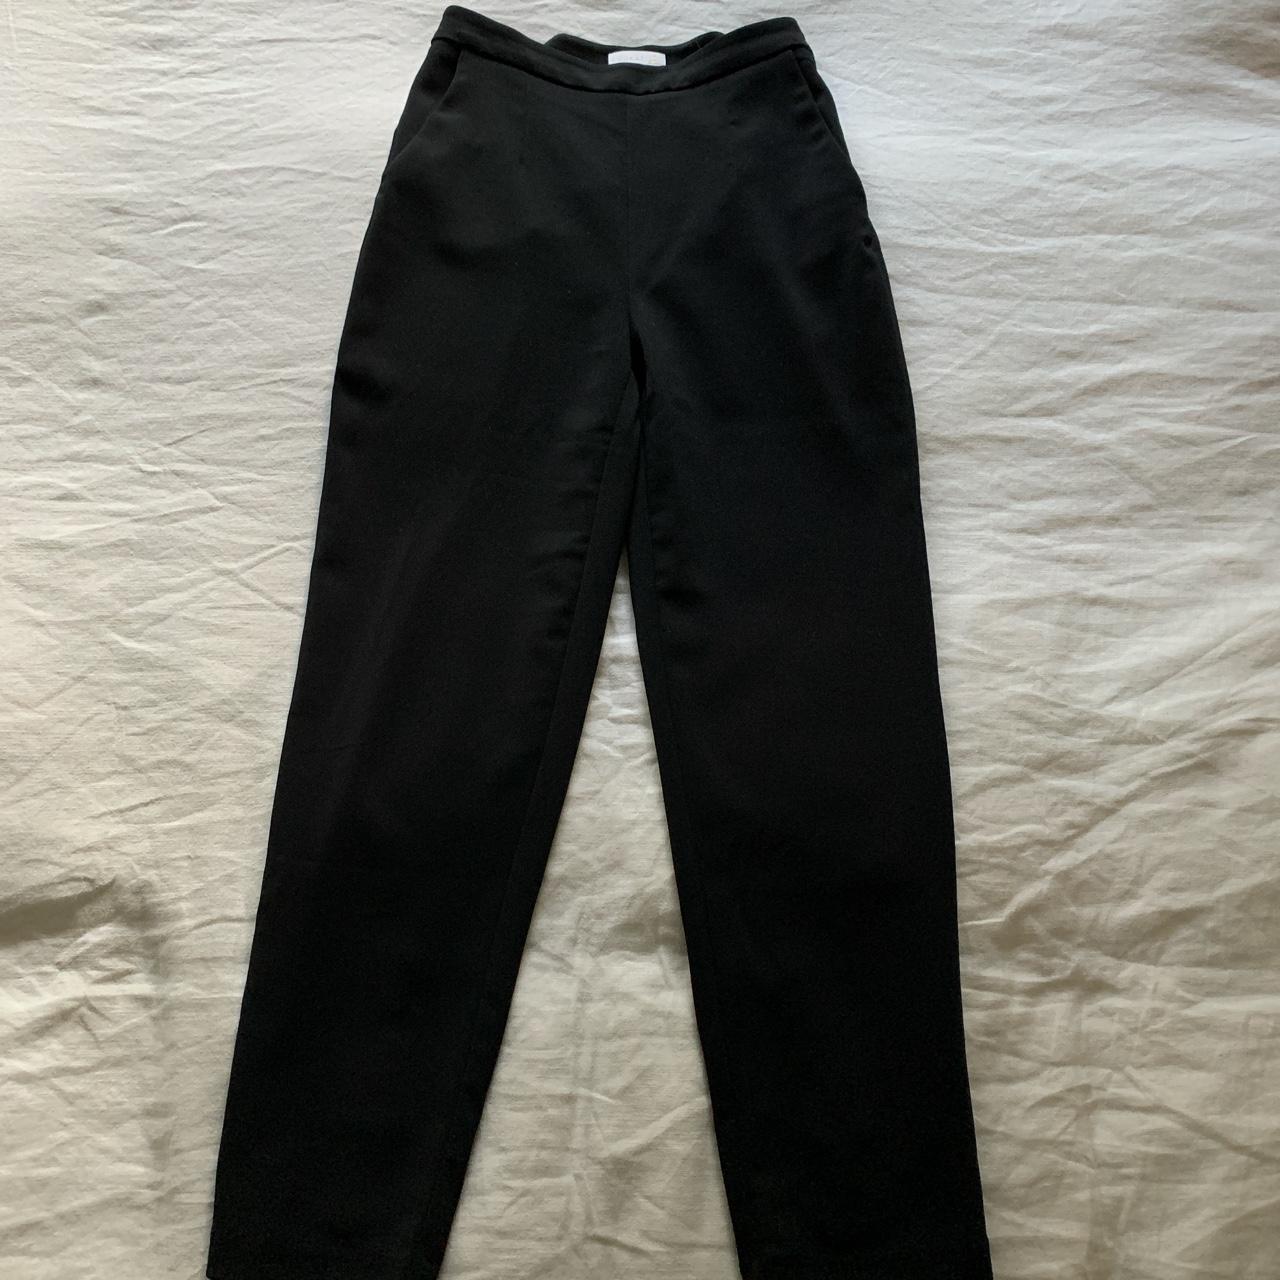 Kookai Pants | Perfect condition | Feature a... - Depop